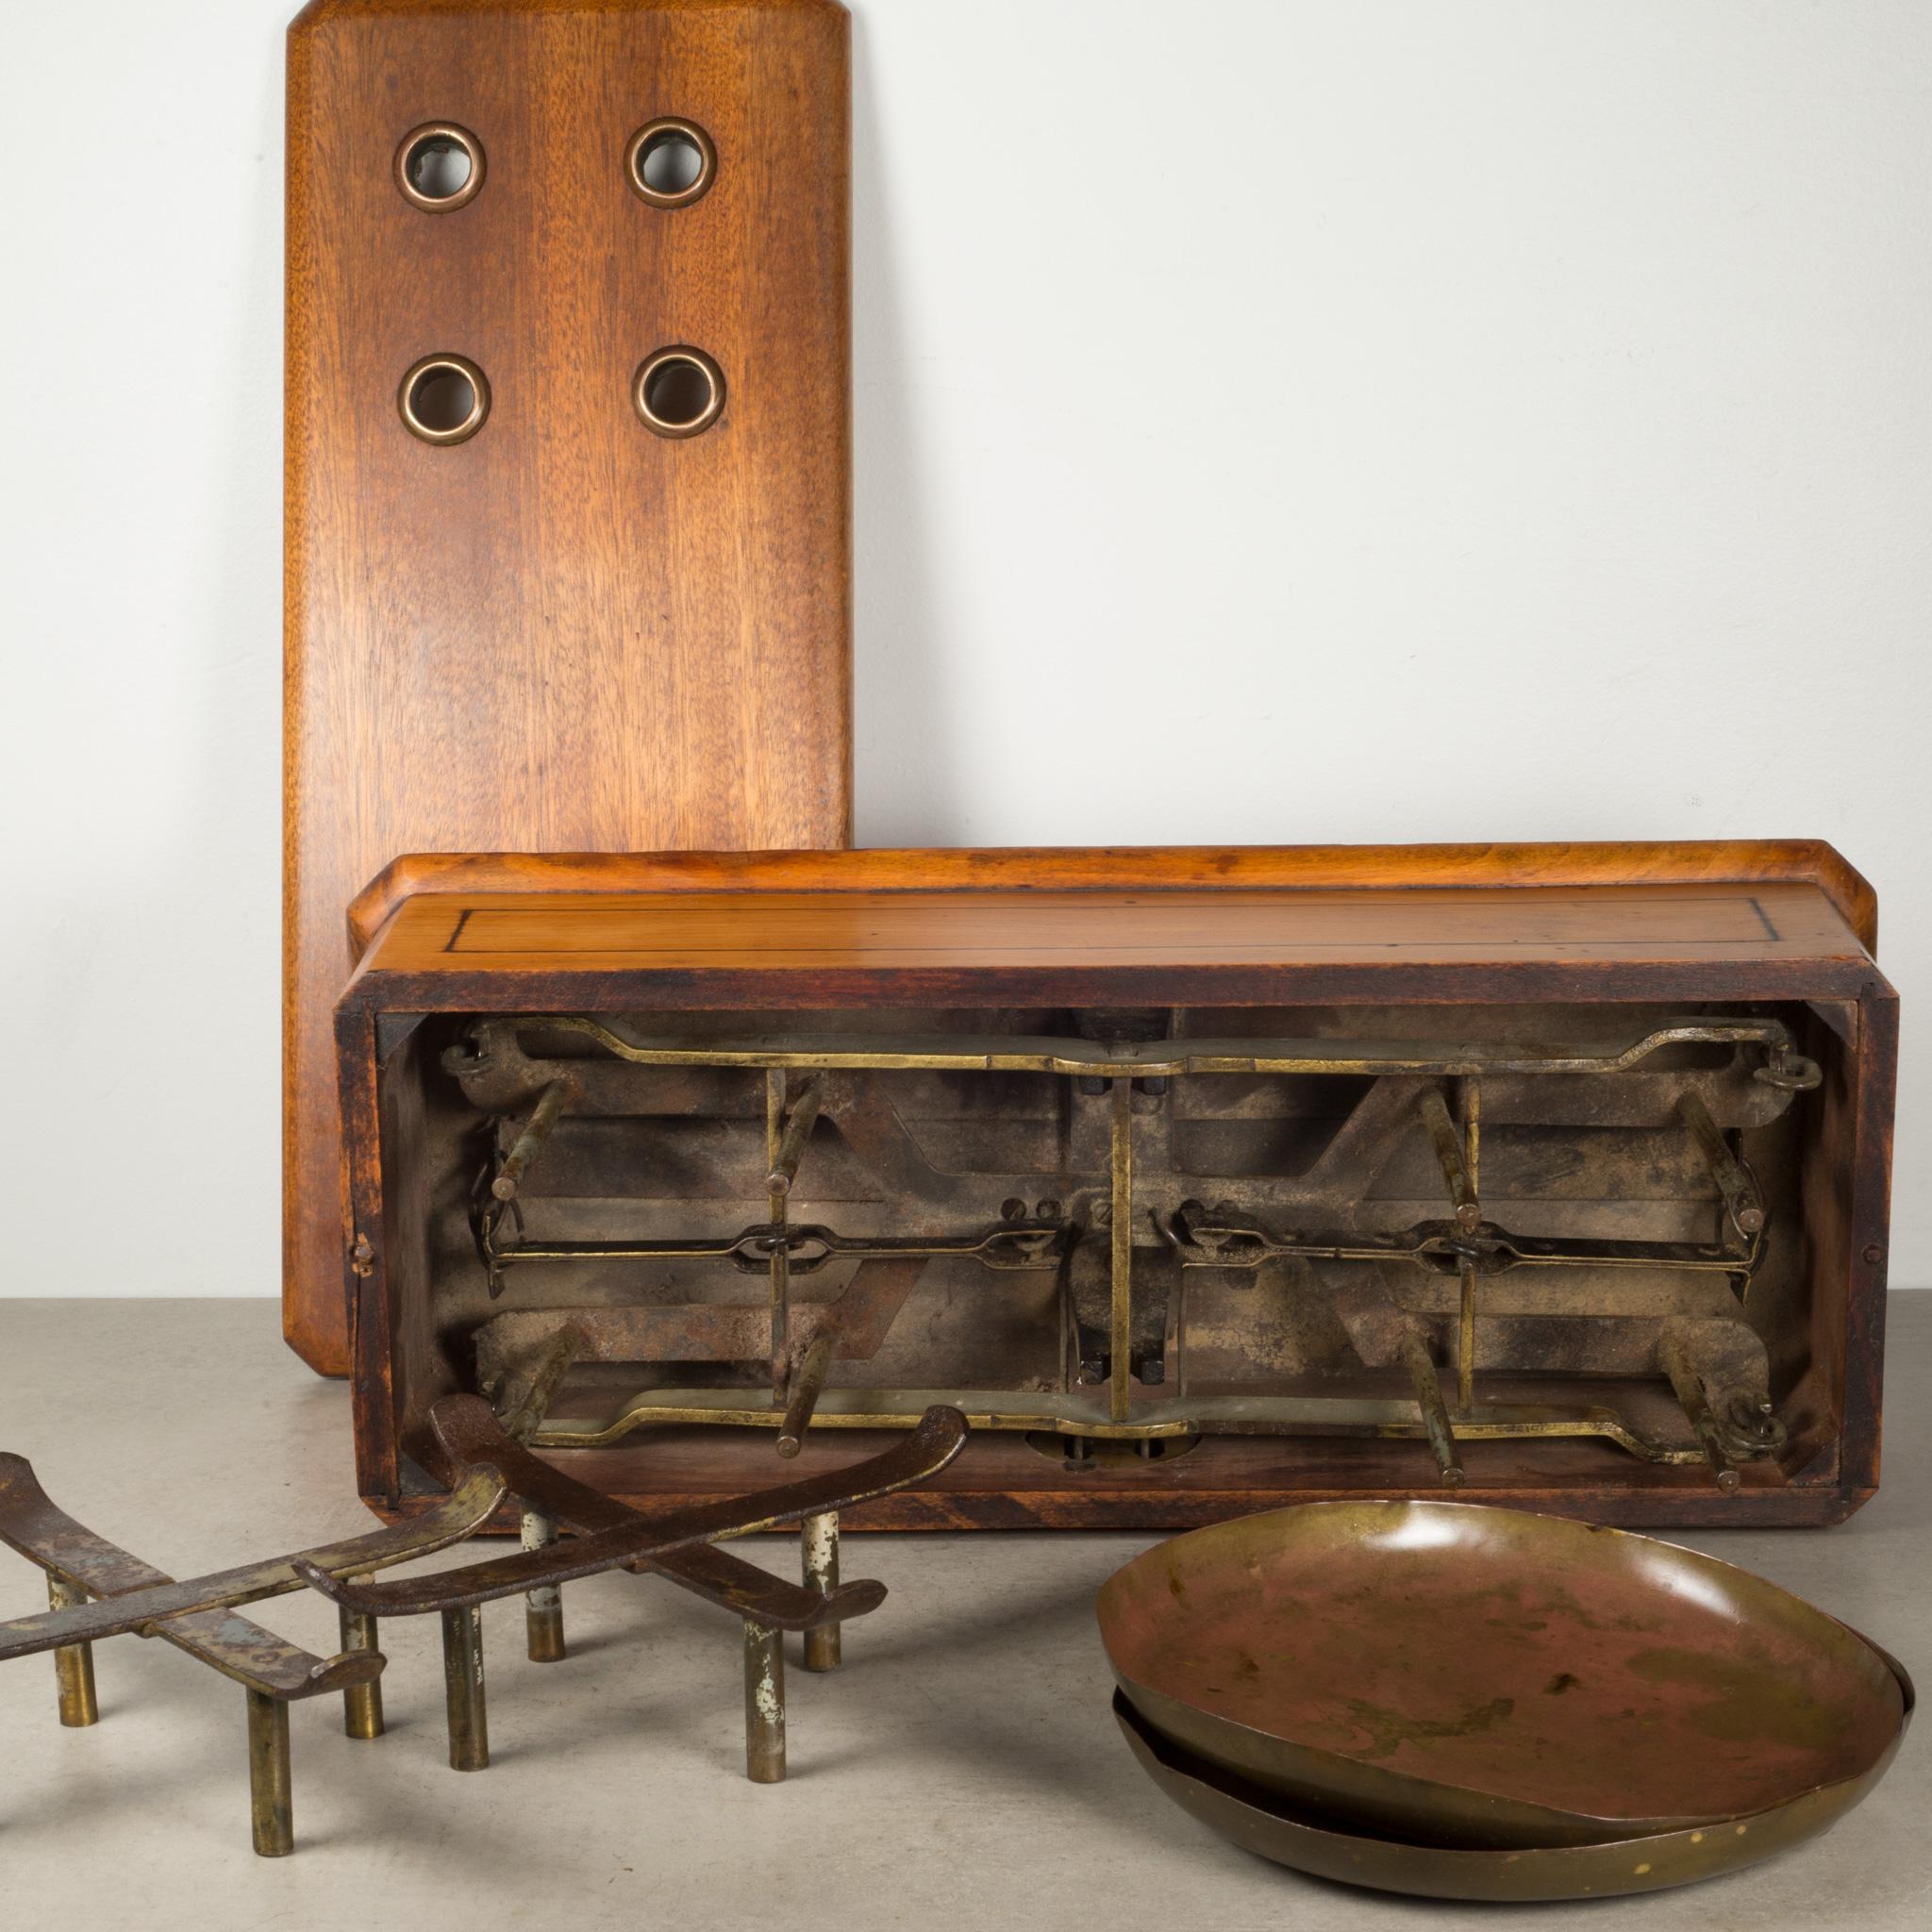 Late 19th French Mahogany & Brass Balance Scale, c.1870 For Sale 3